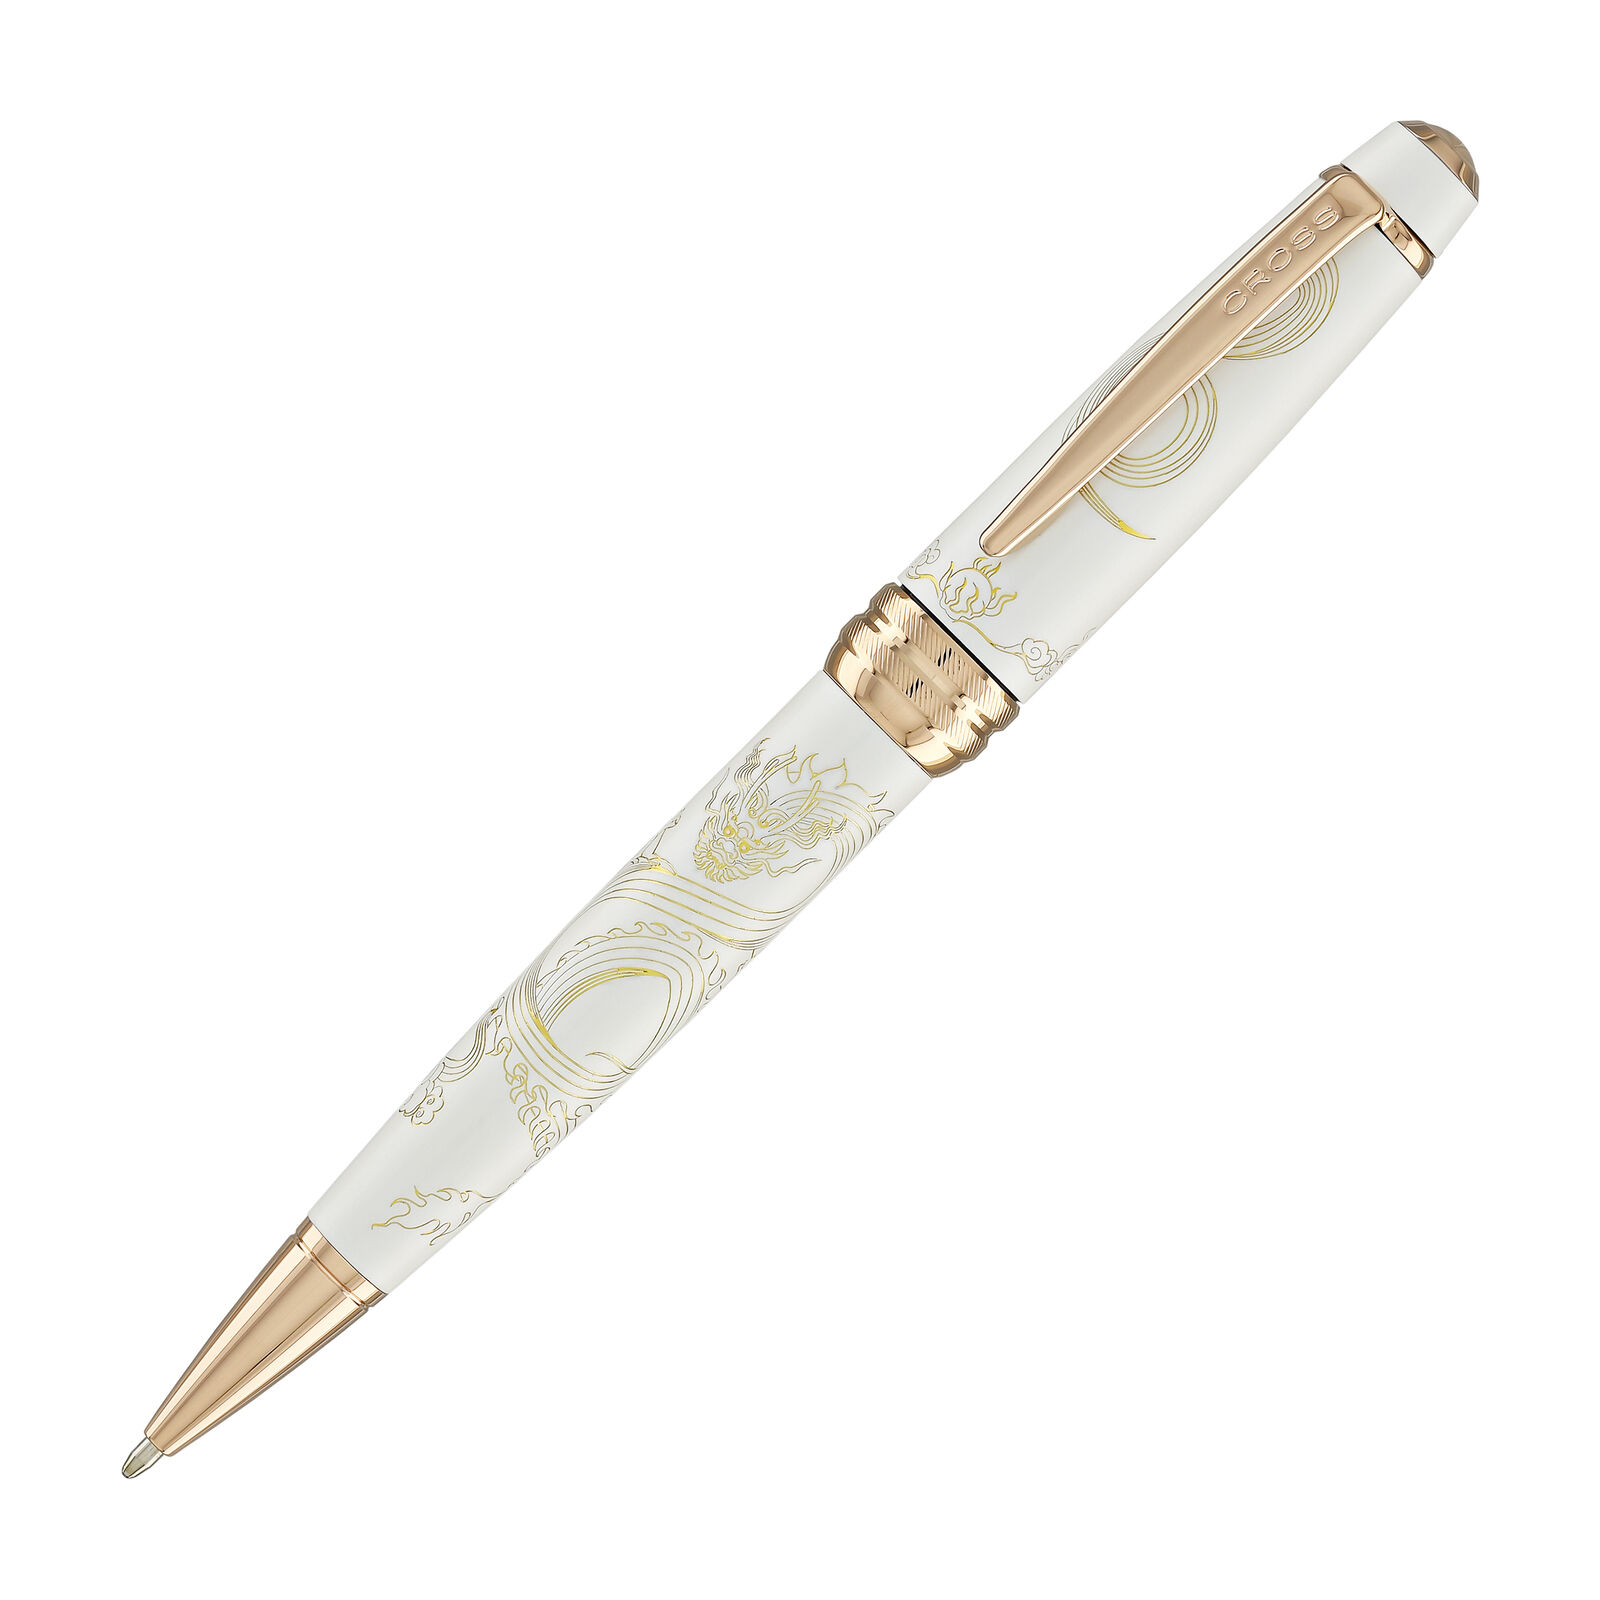 Cross Bailey Year of the Dragon Ballpoint Pen in Pearlescent White Lacquer RG